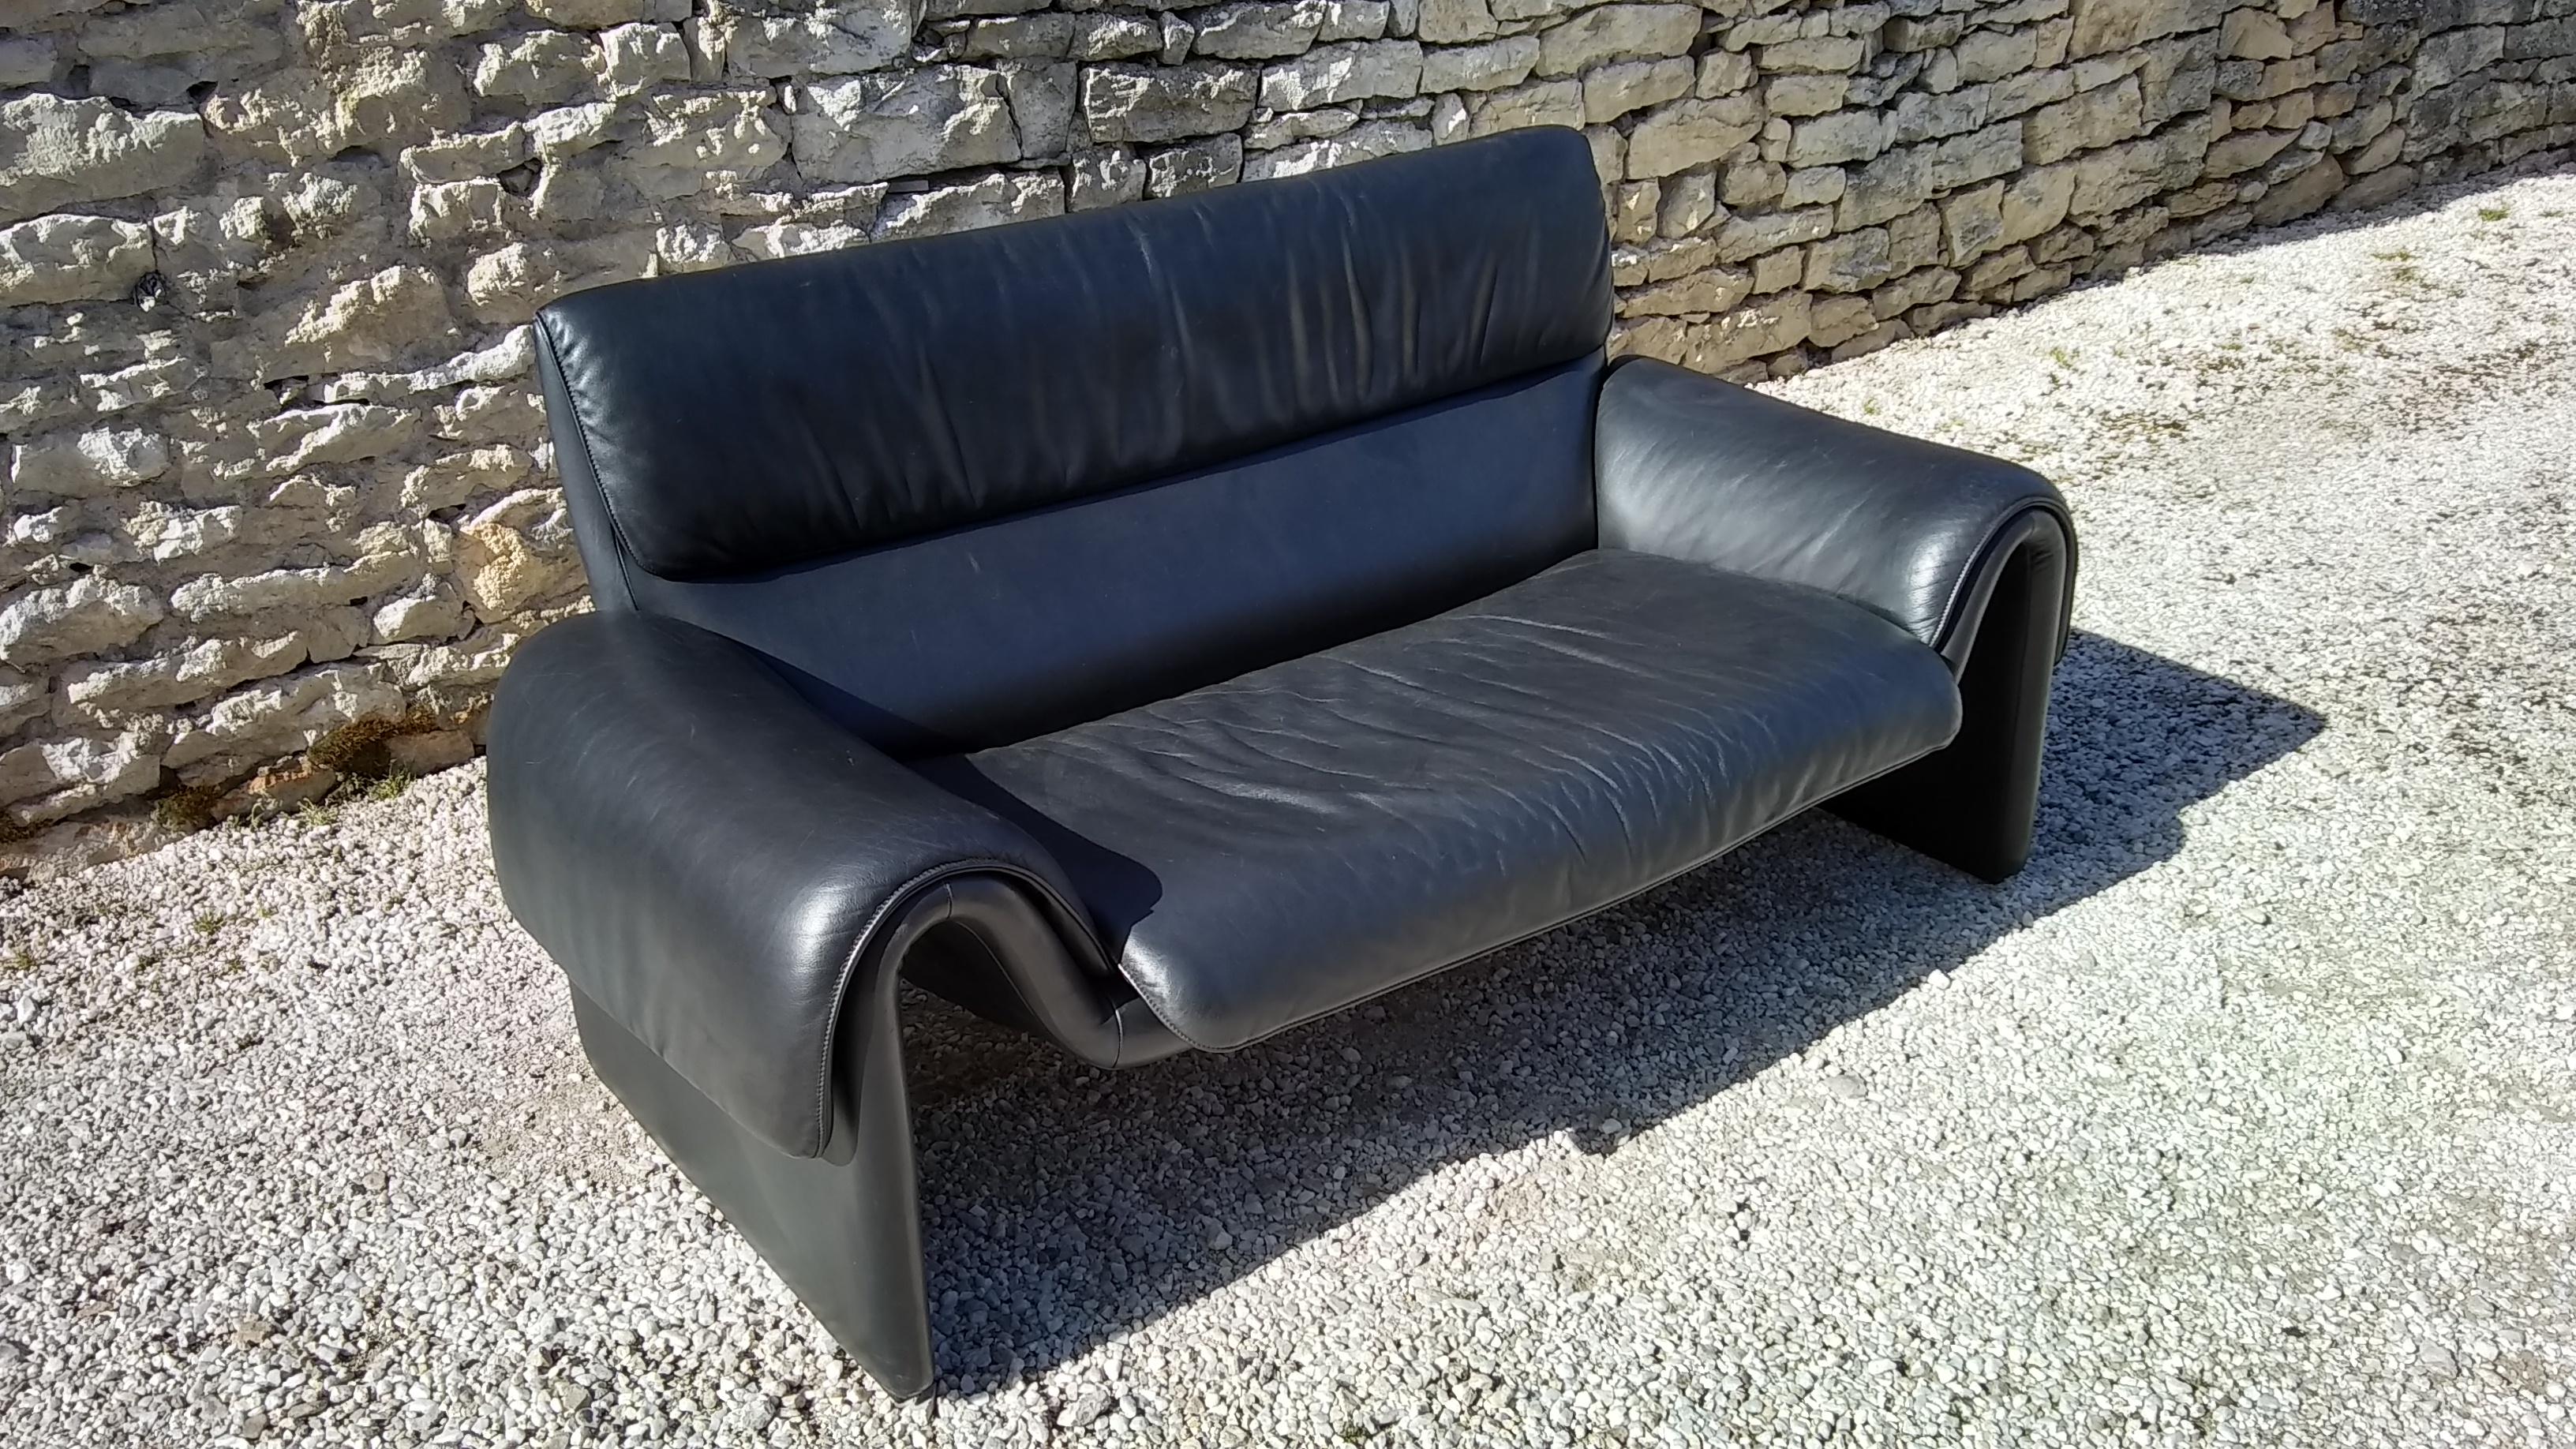 Beautiful leather sofa De Sede DS10/02 
Black leather
Excellent condition
circa 2000
Measures: 207cm x 85cm x 83cm high approx. 
Seat height 42cm approx.
1200 Euros (value 5500).
  